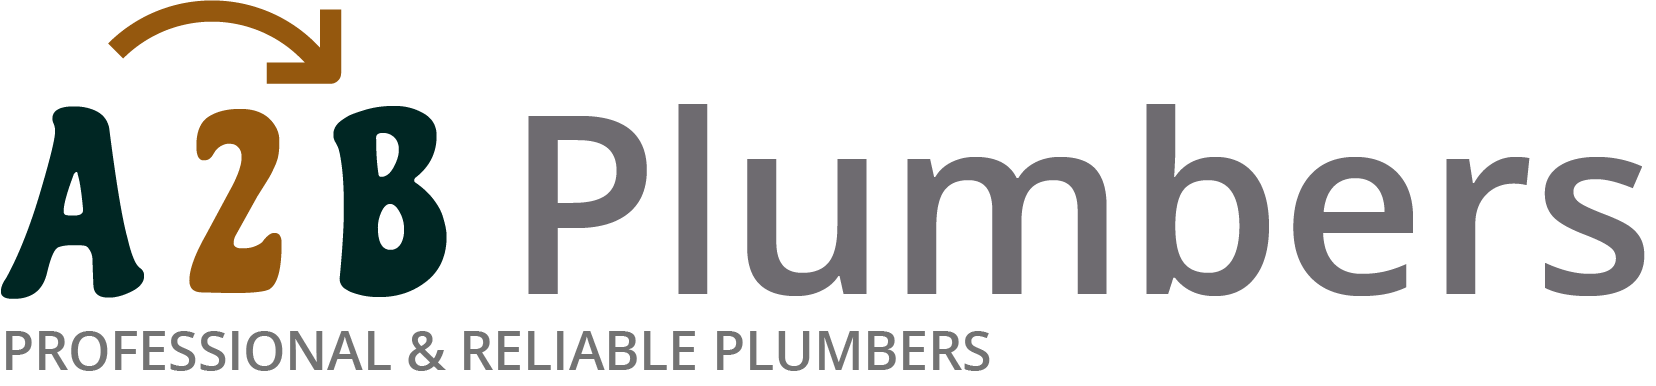 If you need a boiler installed, a radiator repaired or a leaking tap fixed, call us now - we provide services for properties in Falmouth and the local area.